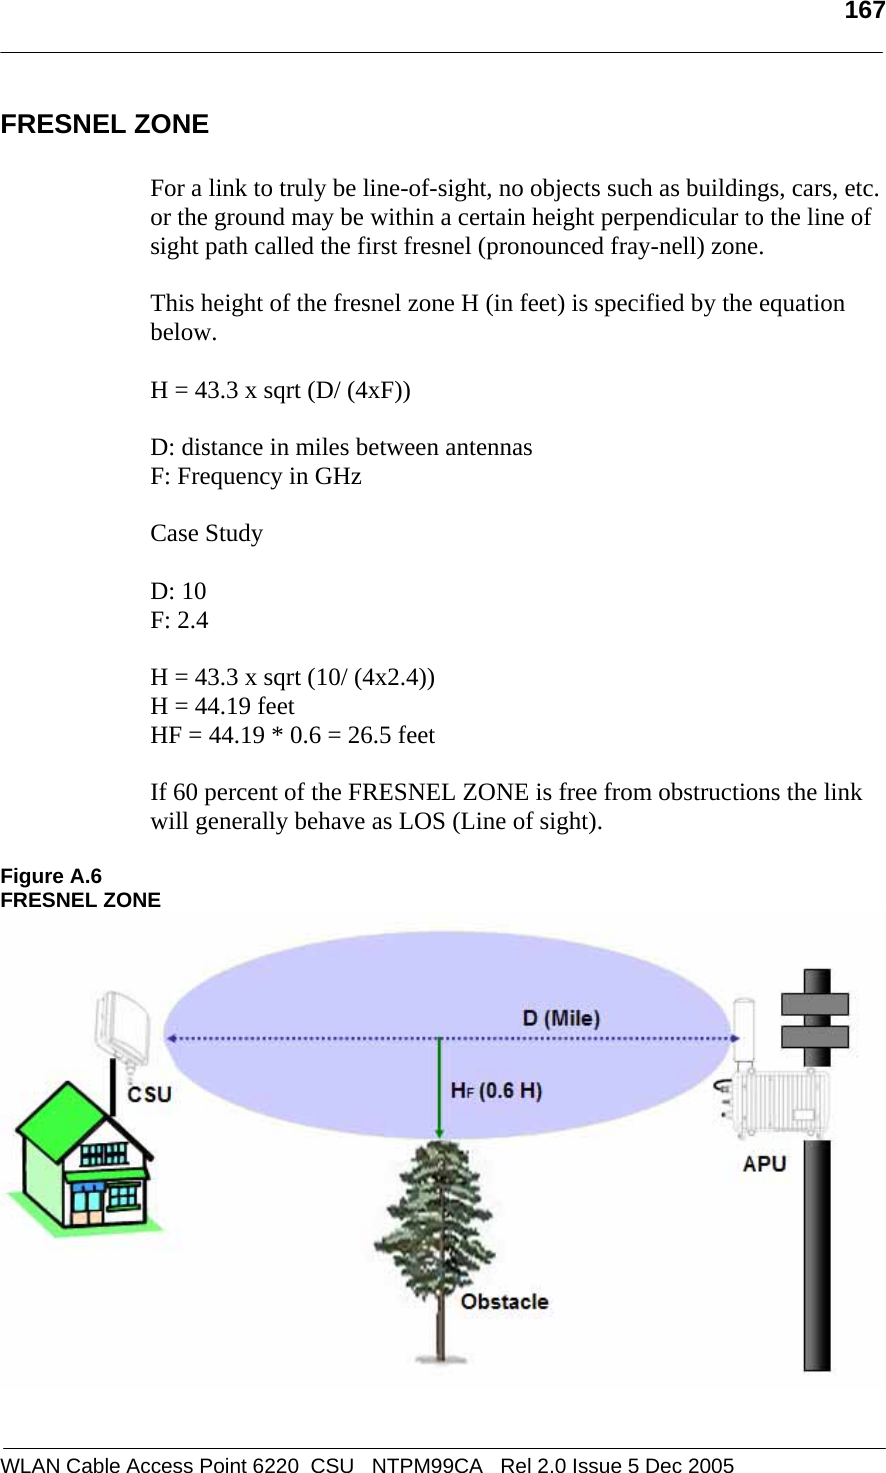   167  WLAN Cable Access Point 6220  CSU   NTPM99CA   Rel 2.0 Issue 5 Dec 2005 FRESNEL ZONE  For a link to truly be line-of-sight, no objects such as buildings, cars, etc. or the ground may be within a certain height perpendicular to the line of sight path called the first fresnel (pronounced fray-nell) zone.   This height of the fresnel zone H (in feet) is specified by the equation below.  H = 43.3 x sqrt (D/ (4xF))  D: distance in miles between antennas F: Frequency in GHz  Case Study  D: 10 F: 2.4  H = 43.3 x sqrt (10/ (4x2.4)) H = 44.19 feet HF = 44.19 * 0.6 = 26.5 feet  If 60 percent of the FRESNEL ZONE is free from obstructions the link will generally behave as LOS (Line of sight).  Figure A.6 FRESNEL ZONE  